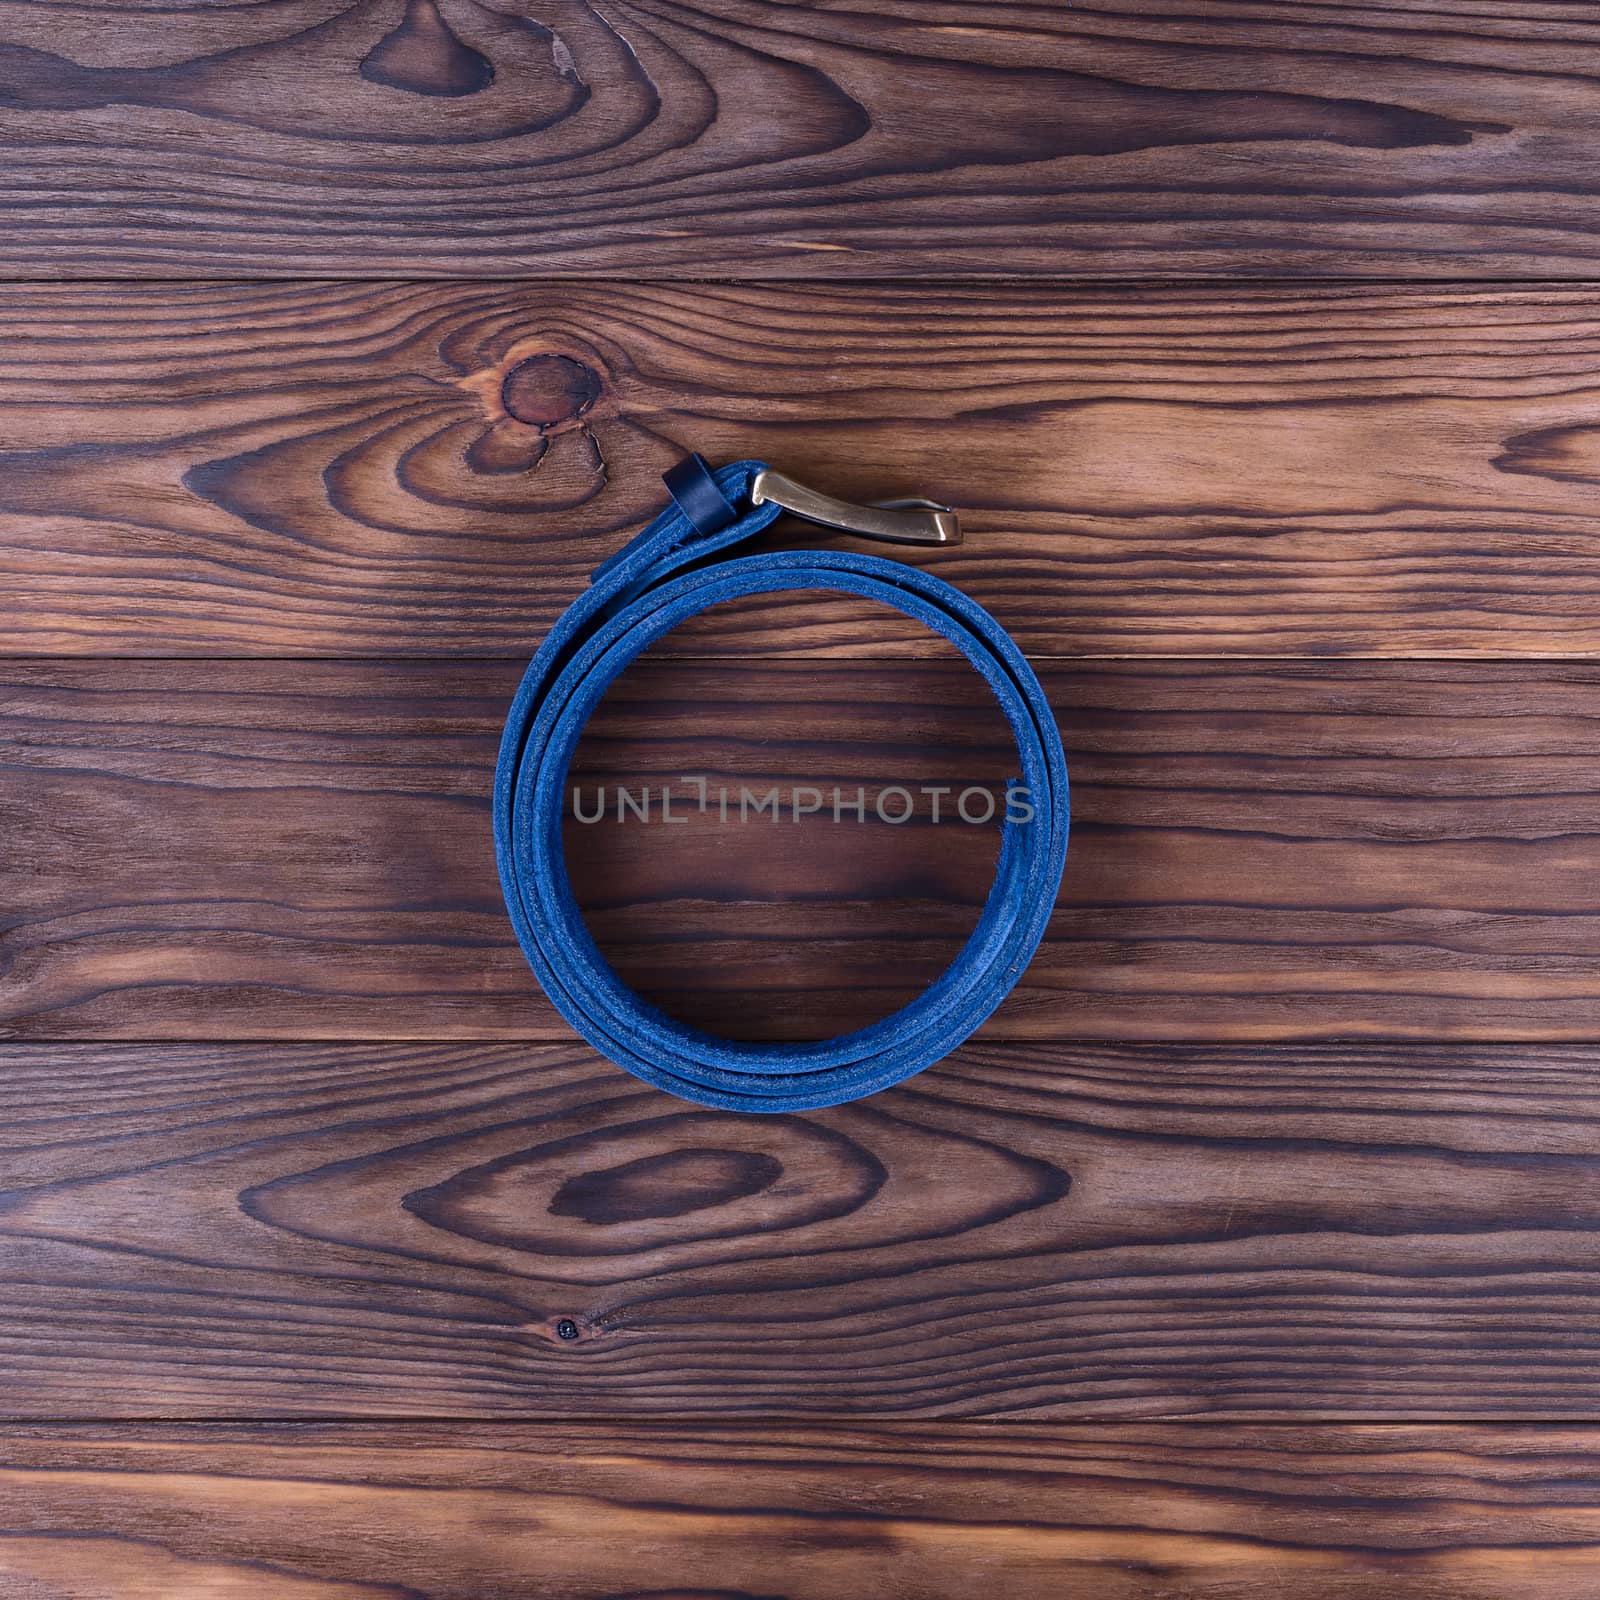 Hue blue color handmade belt lies on textured wooden background. The belt is twisted into a ring. Up to down view. Stock photo of businessman accessories.